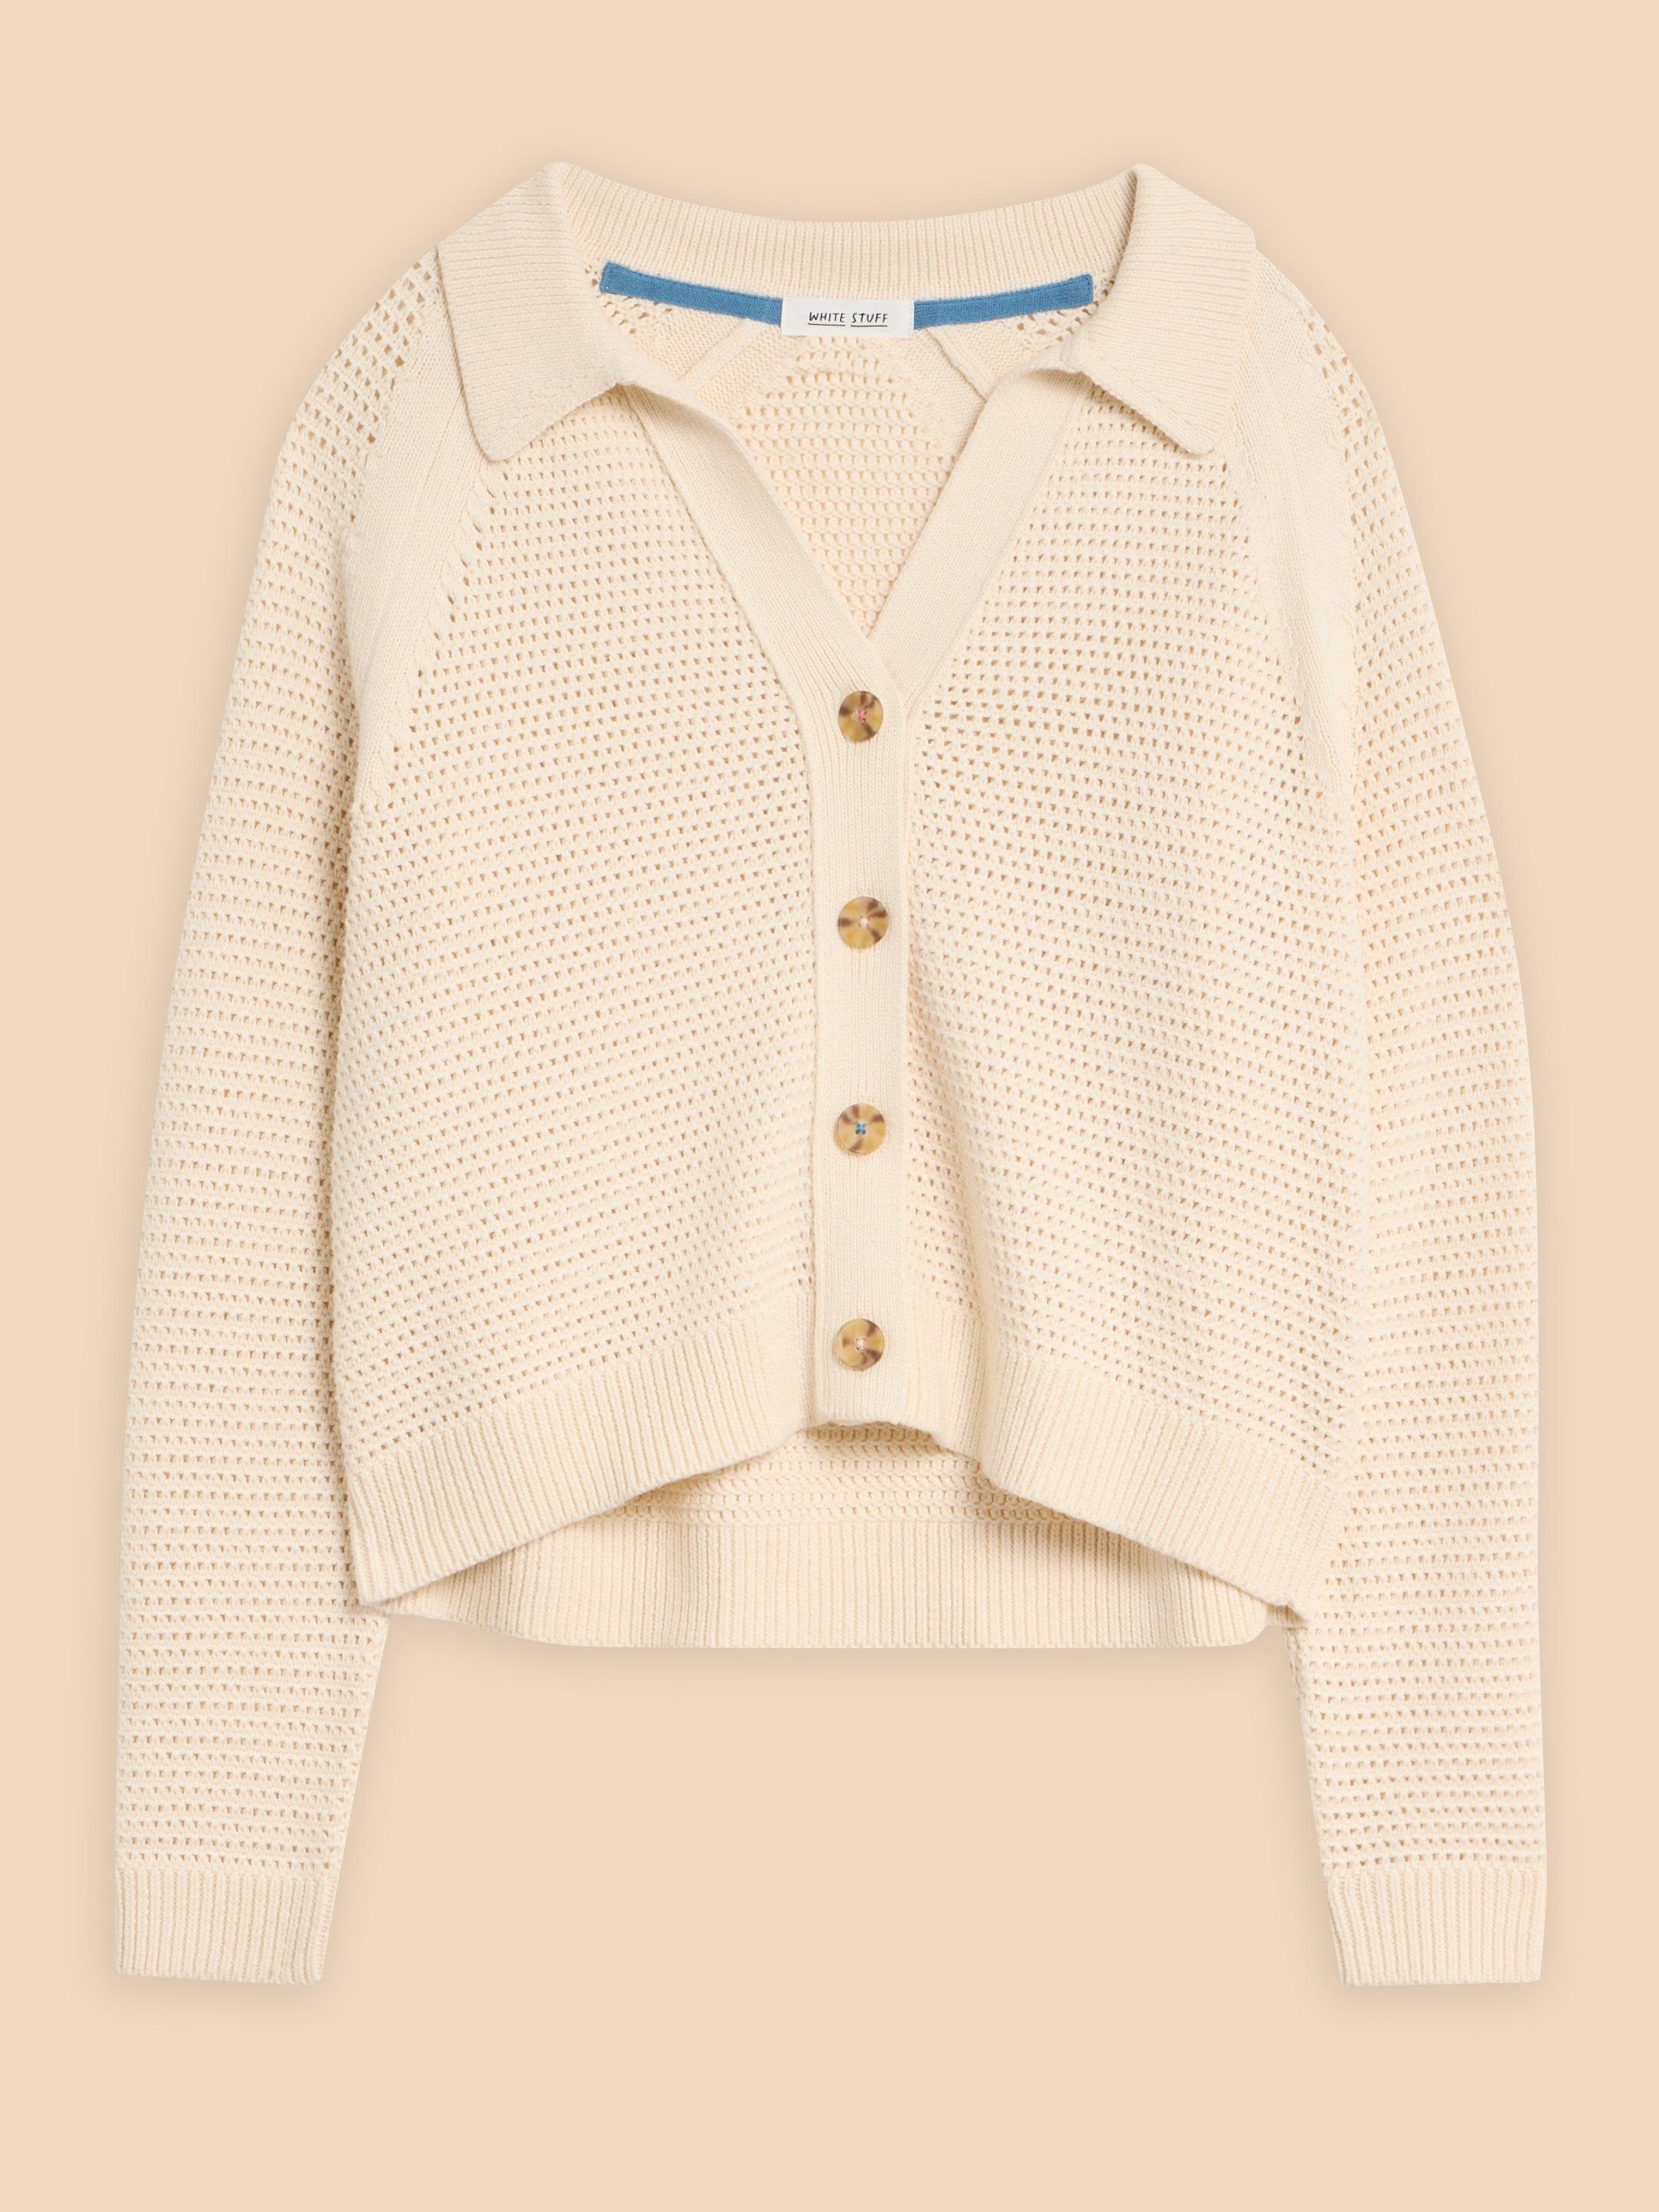 CHATERLY CROCHET COLLAR CARDI in NAT WHITE - FLAT FRONT